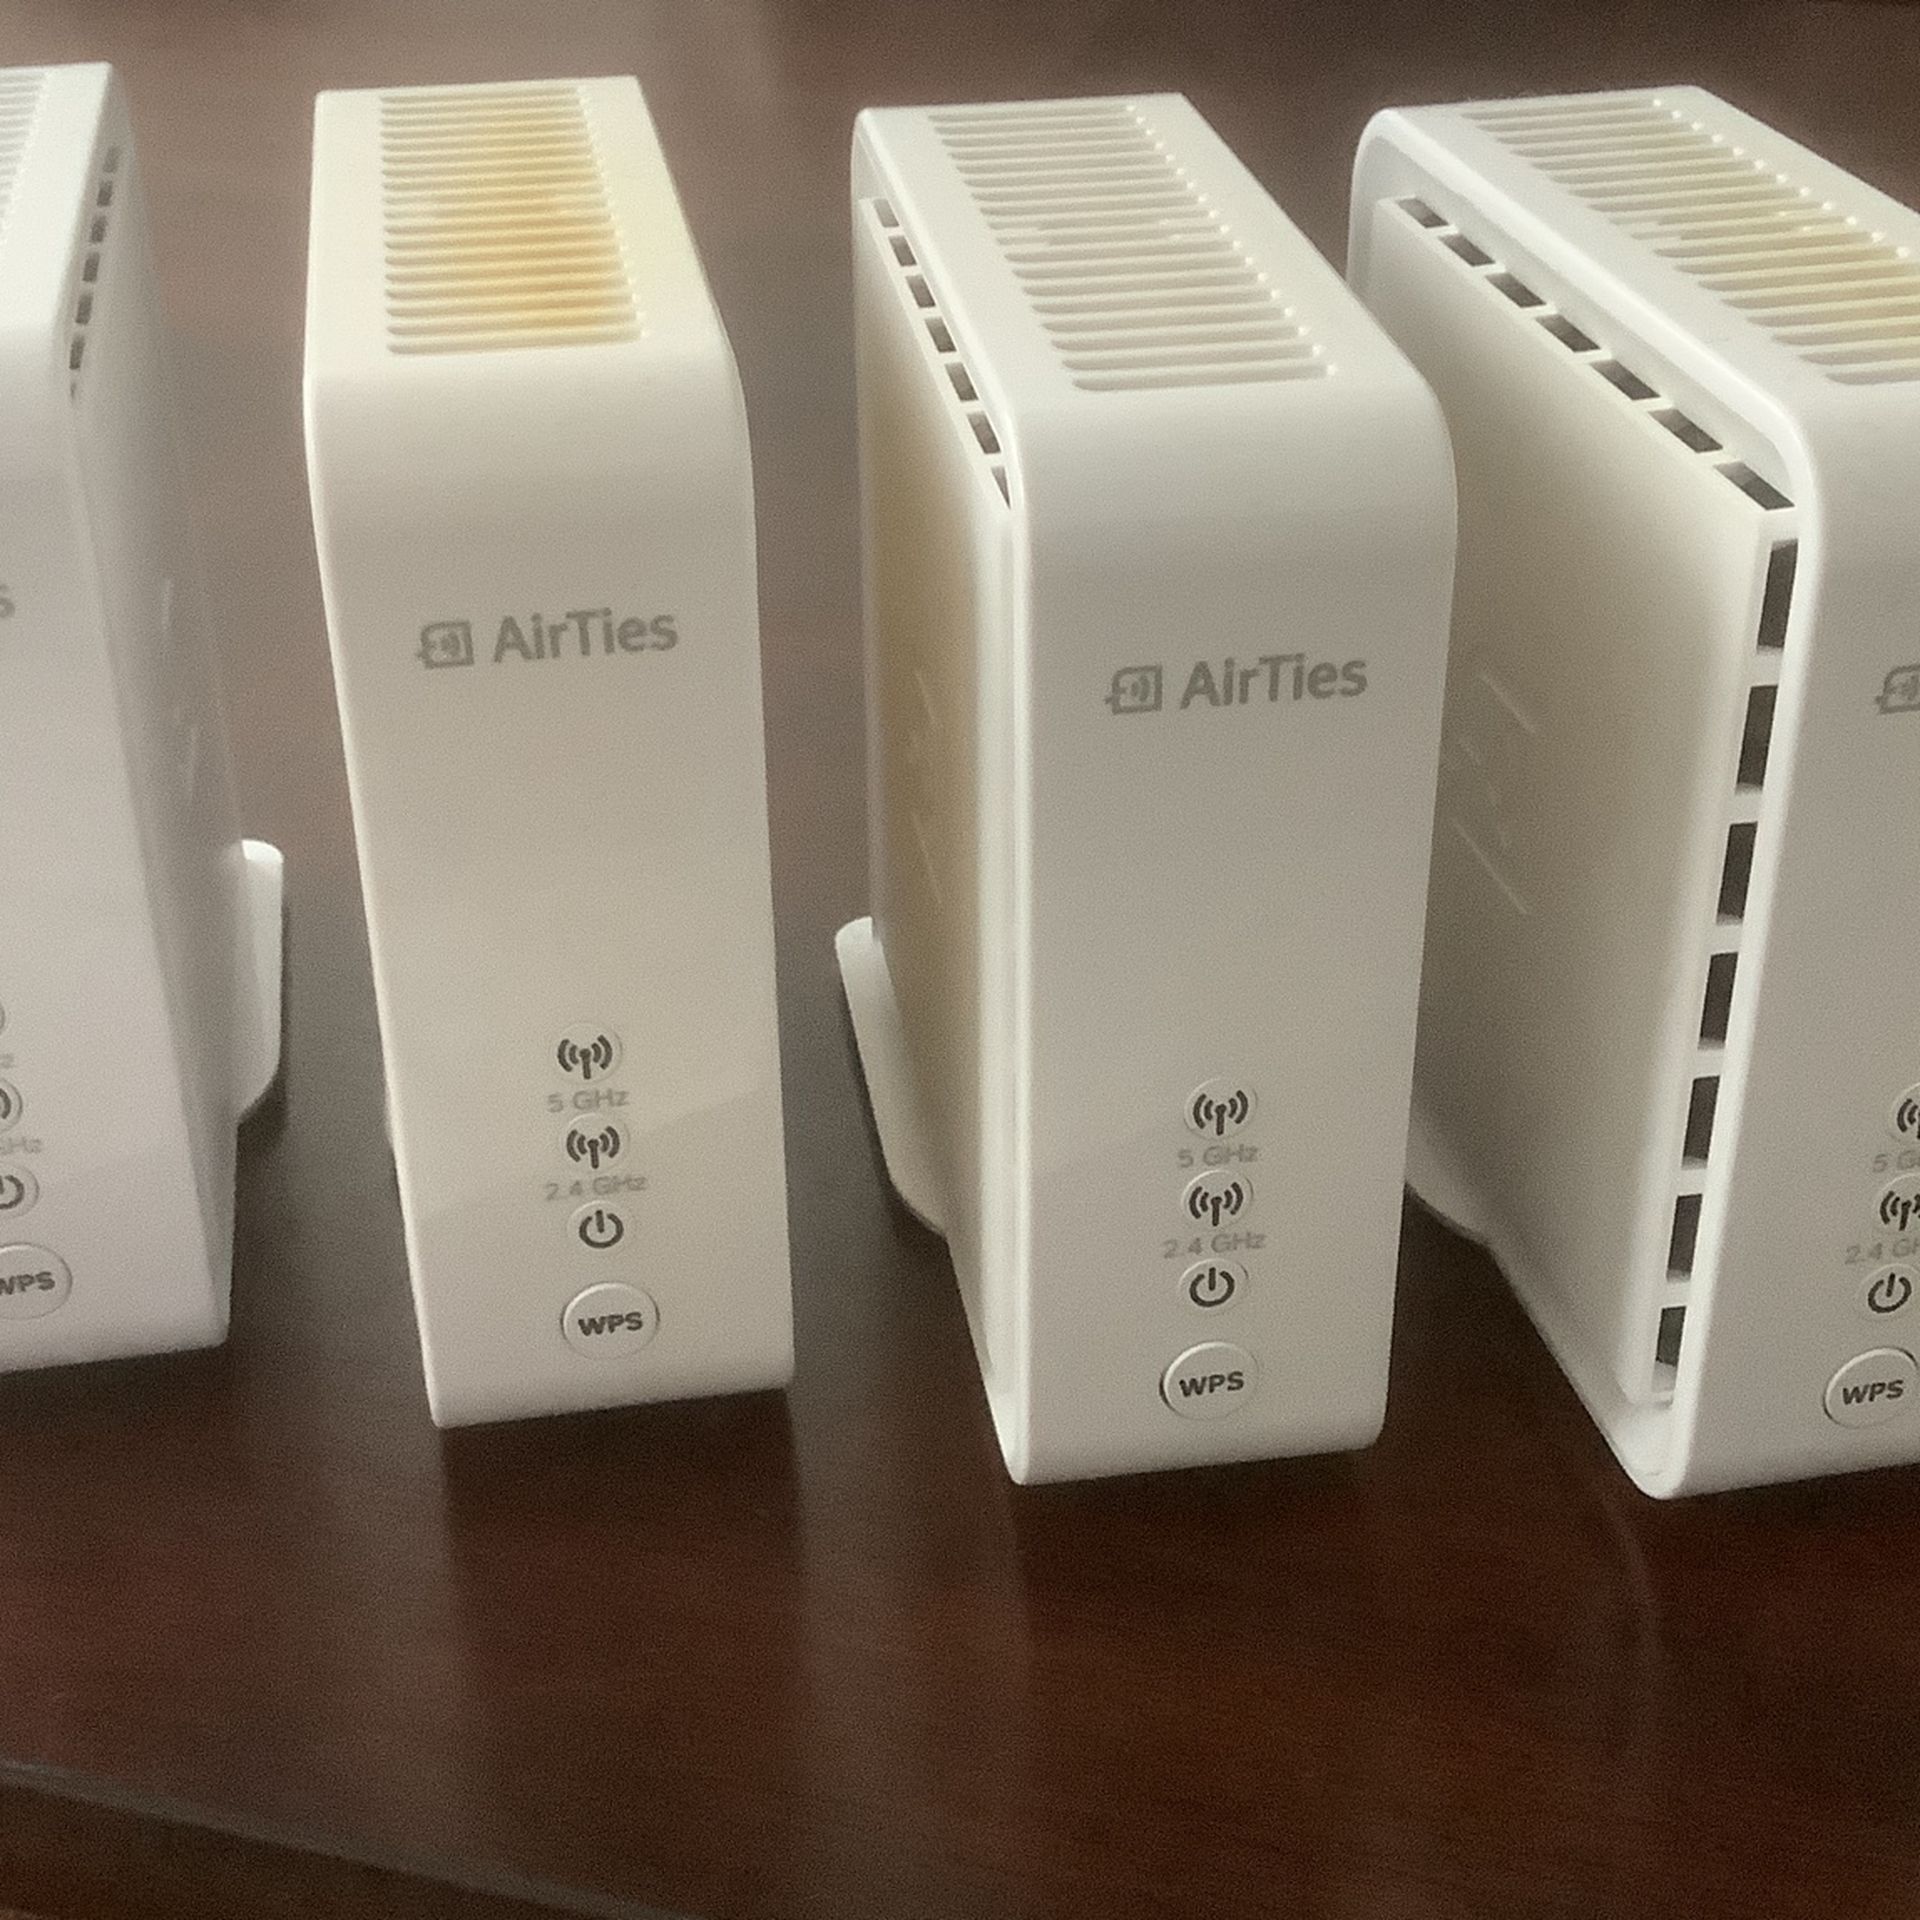 AT&T AirTies Air 4920 Smart Wi-Fi Extender Wireless Access Complete w AC Adapter 4 Units